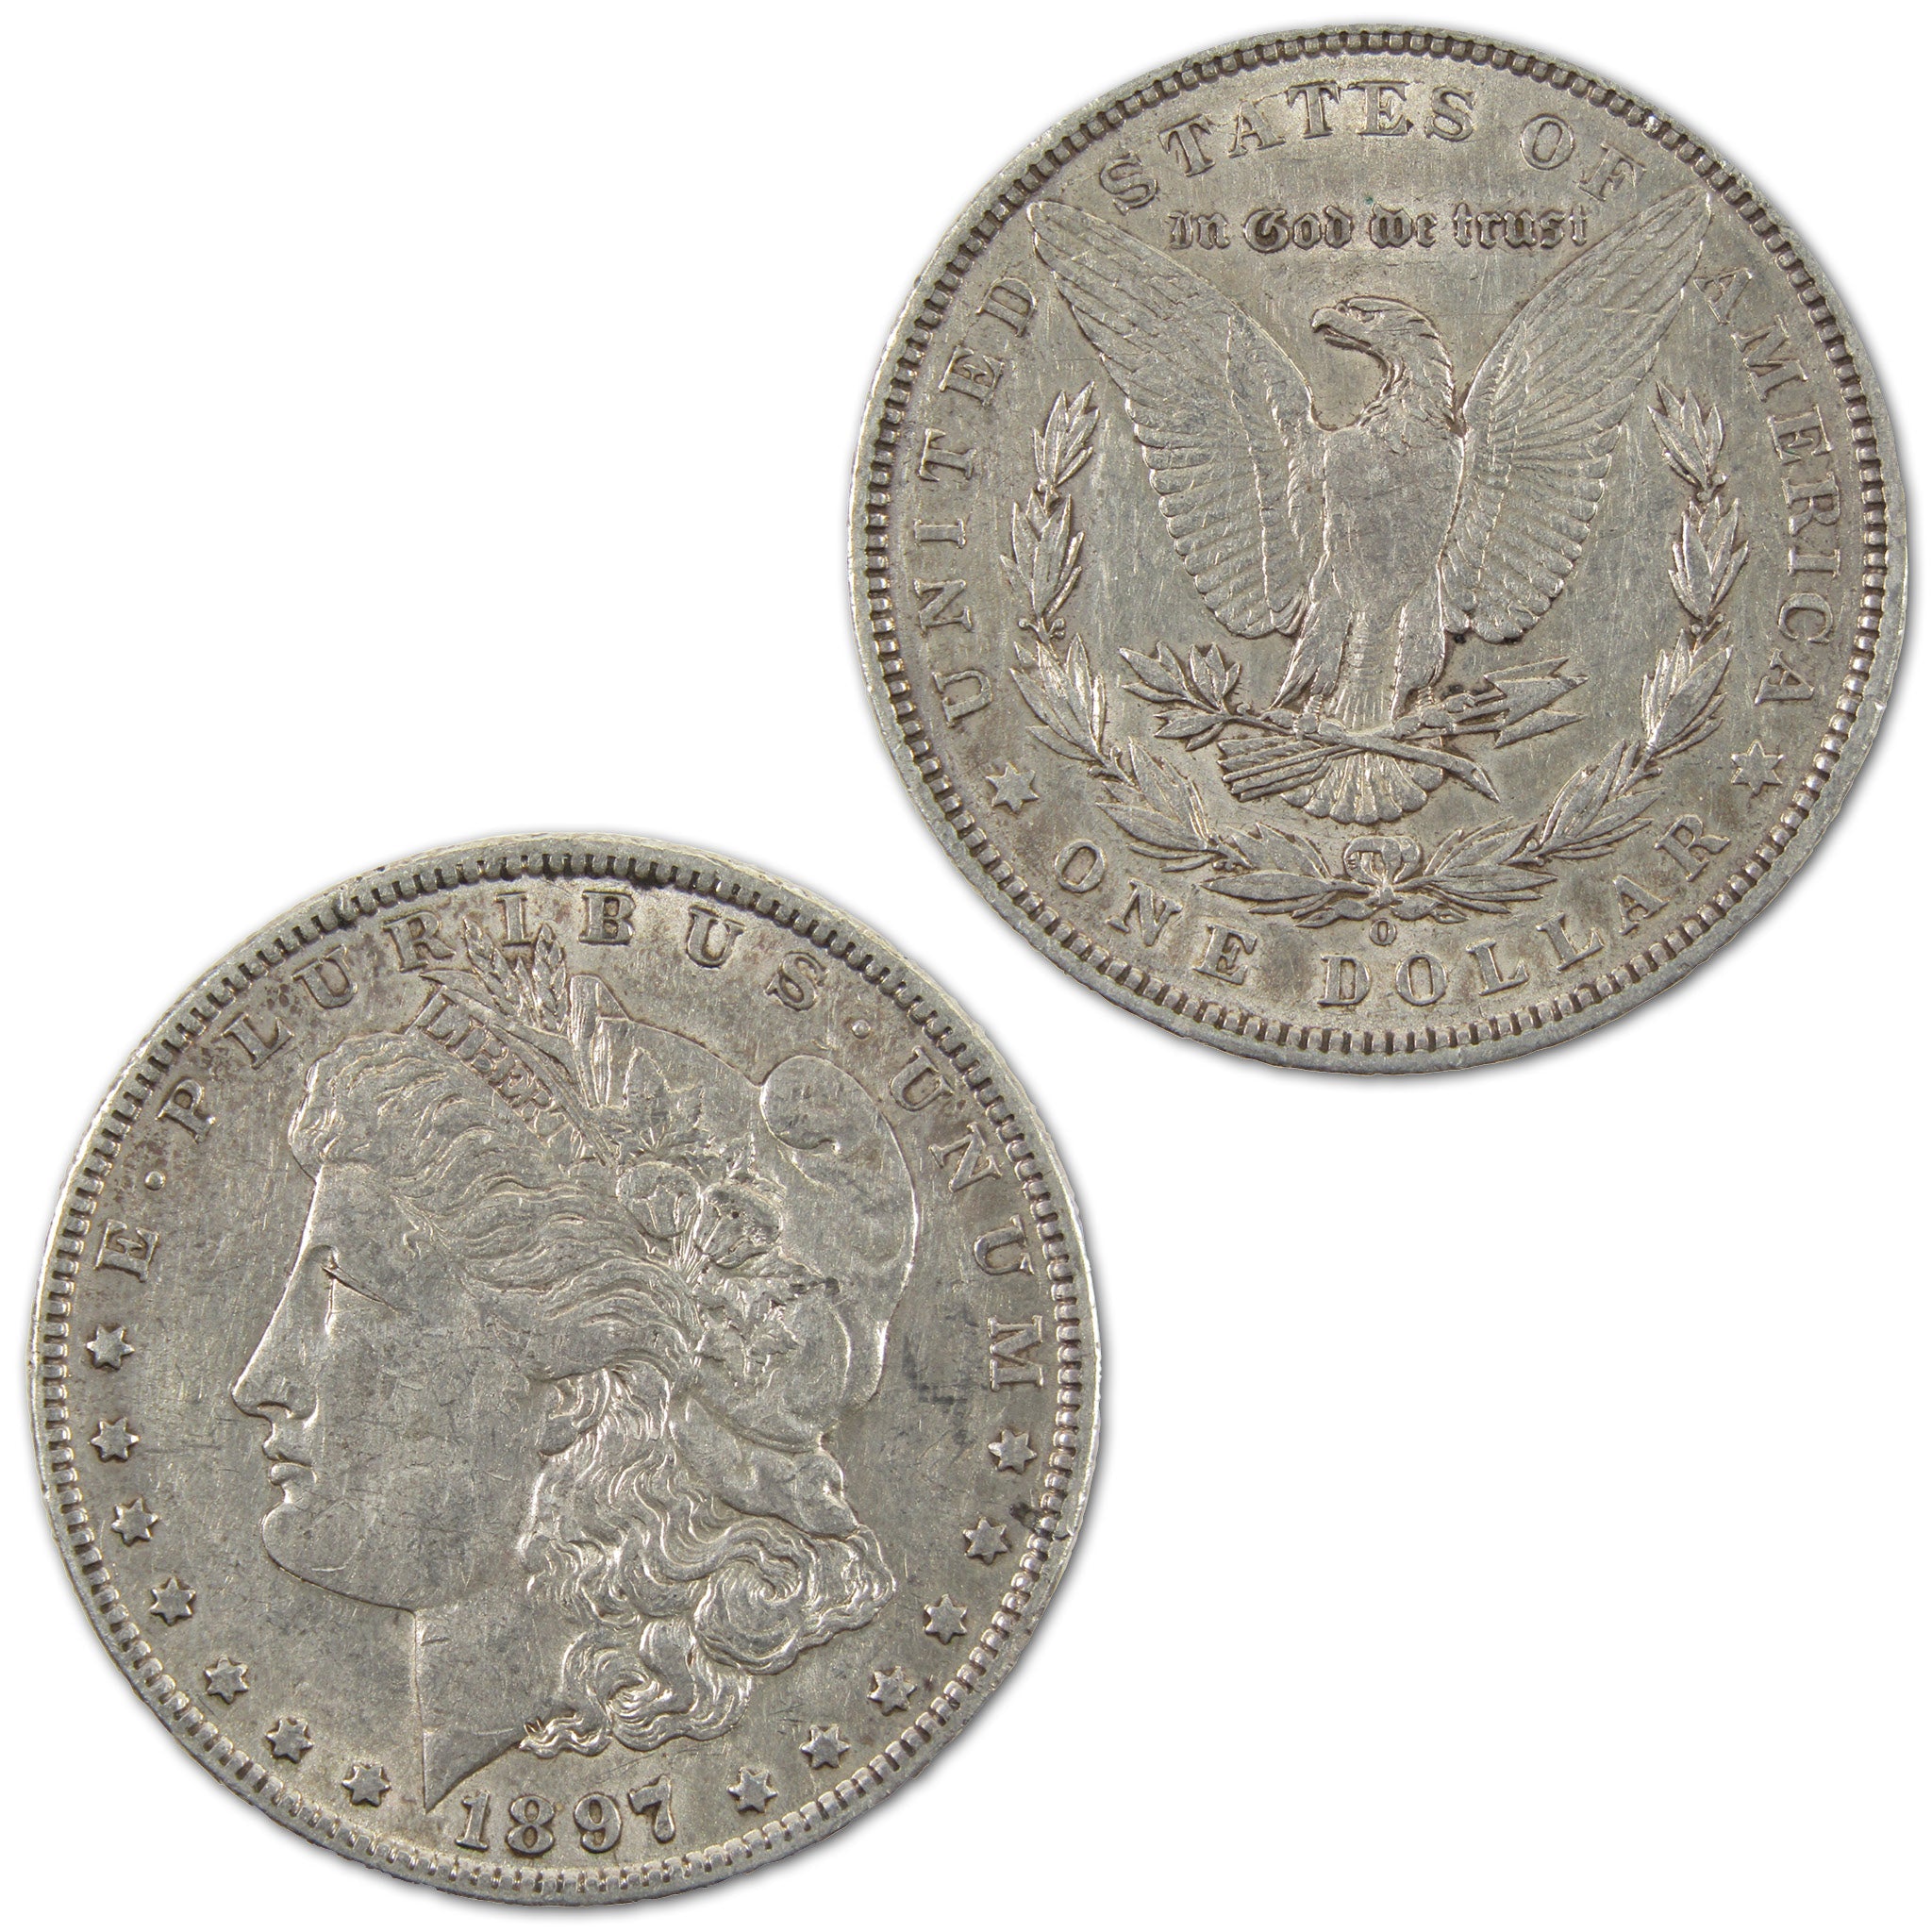 1897 O Morgan Dollar XF EF Extremely Fine Silver $1 Coin SKU:I10762 - Morgan coin - Morgan silver dollar - Morgan silver dollar for sale - Profile Coins &amp; Collectibles